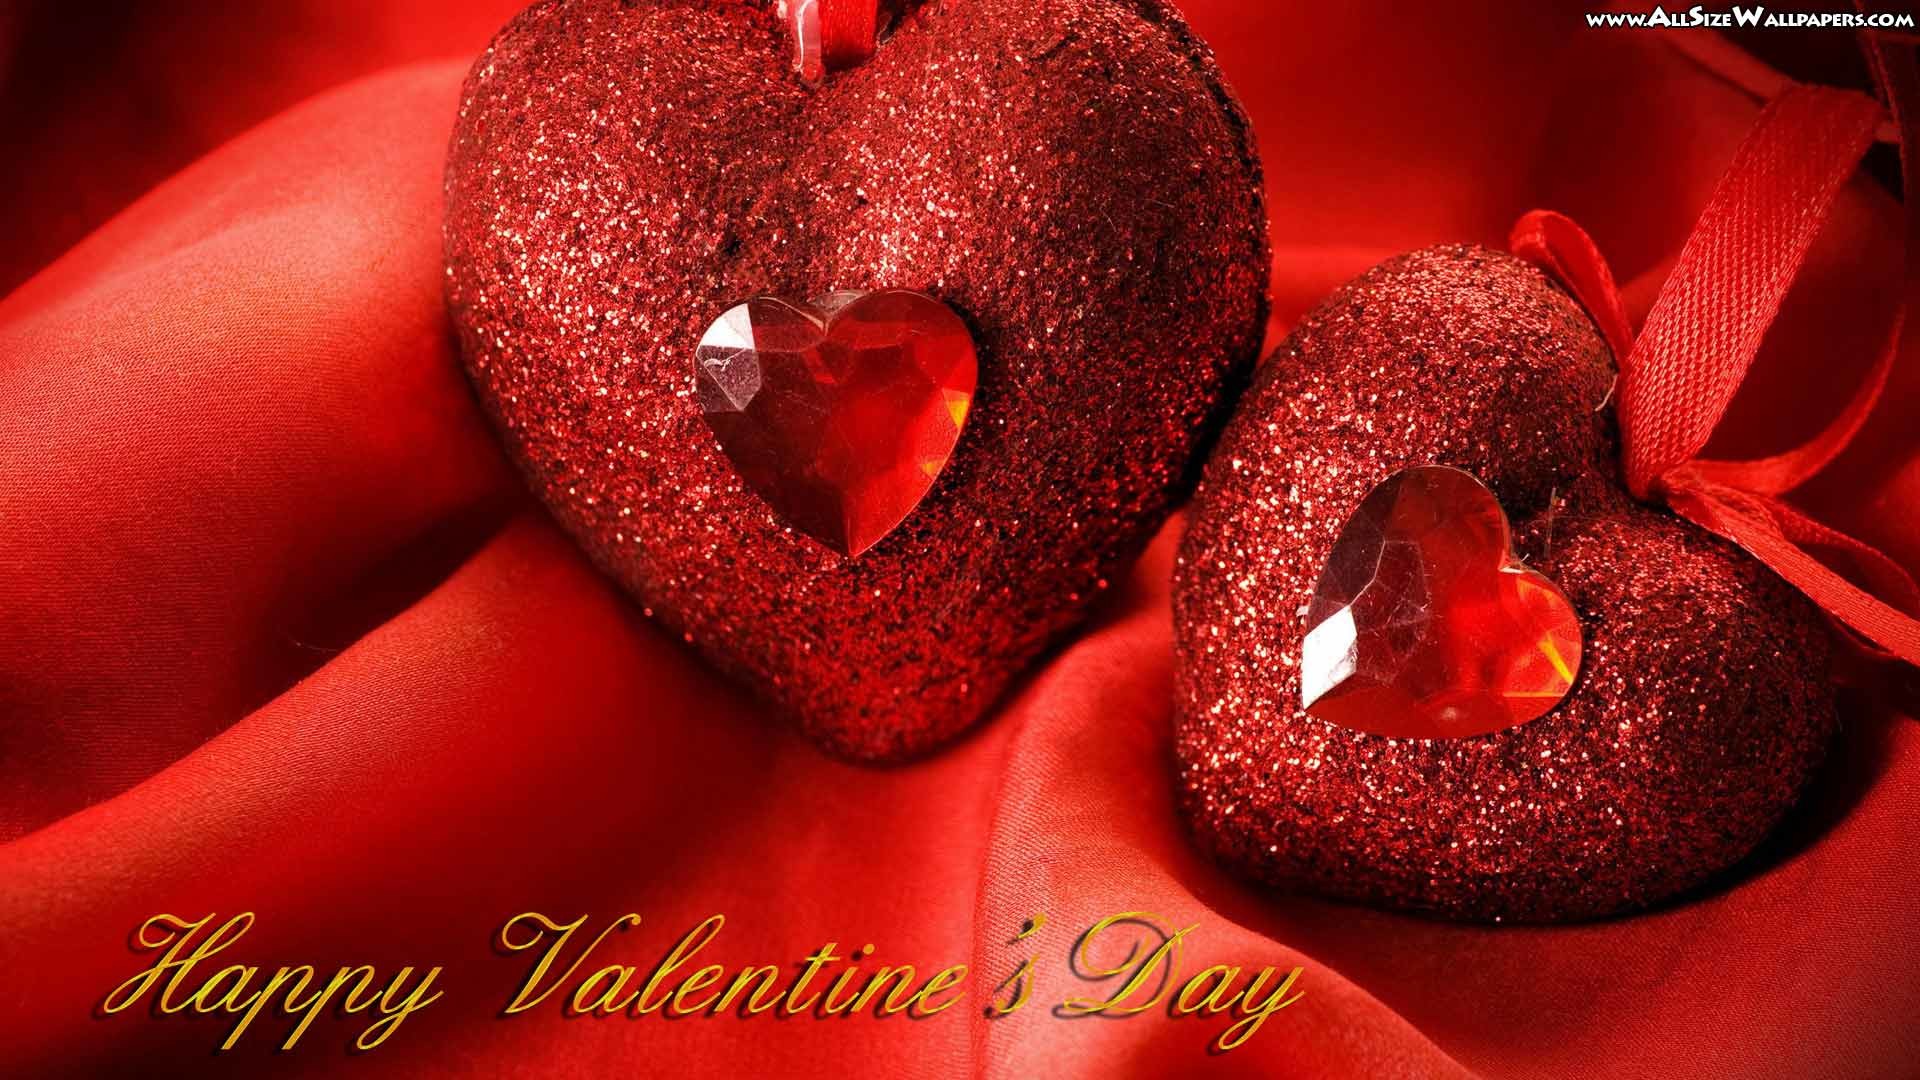 1920x1080 beautiful valentine wallpapers (4) - High Quality Photos